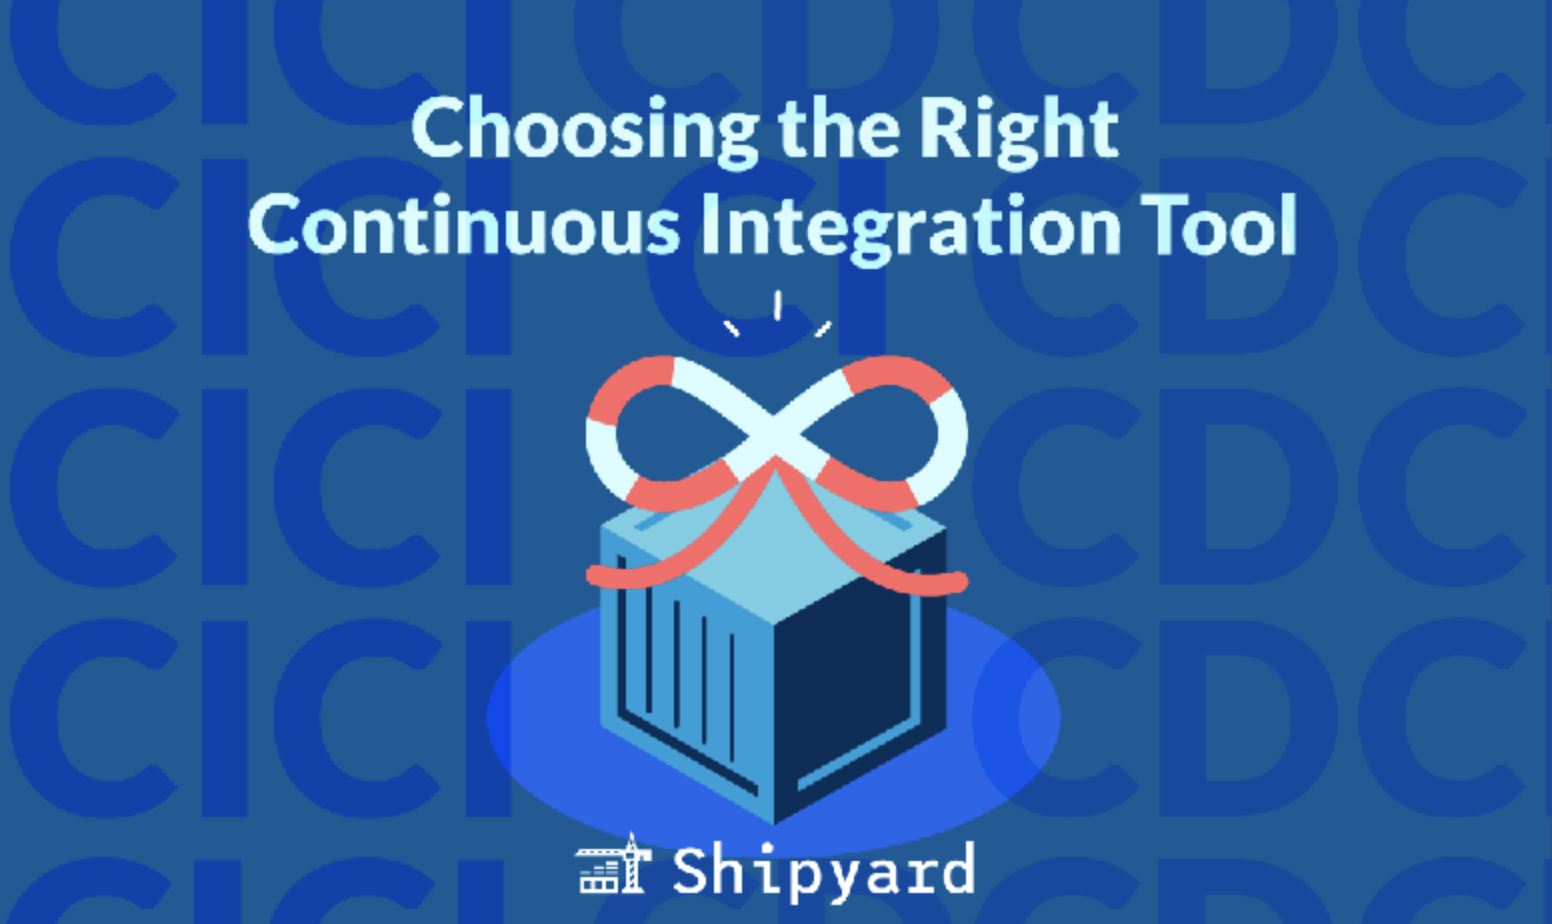 Choosing a CI tool for your continuous integration pipeline